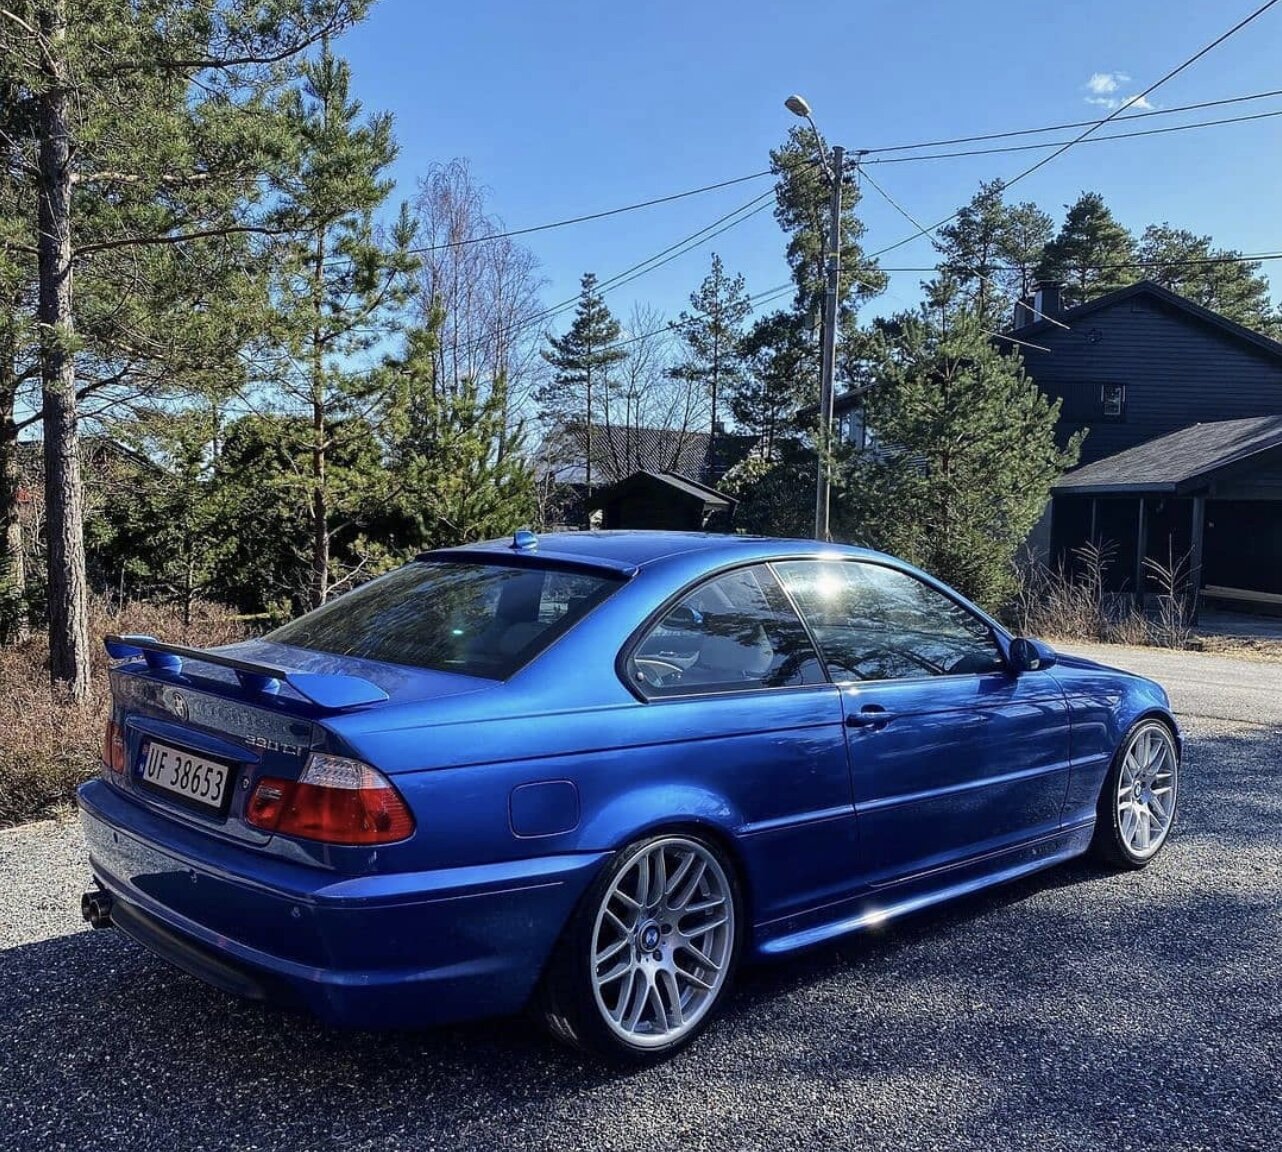 E46 330ci CLUBSPORT on TM TradeMe discussions